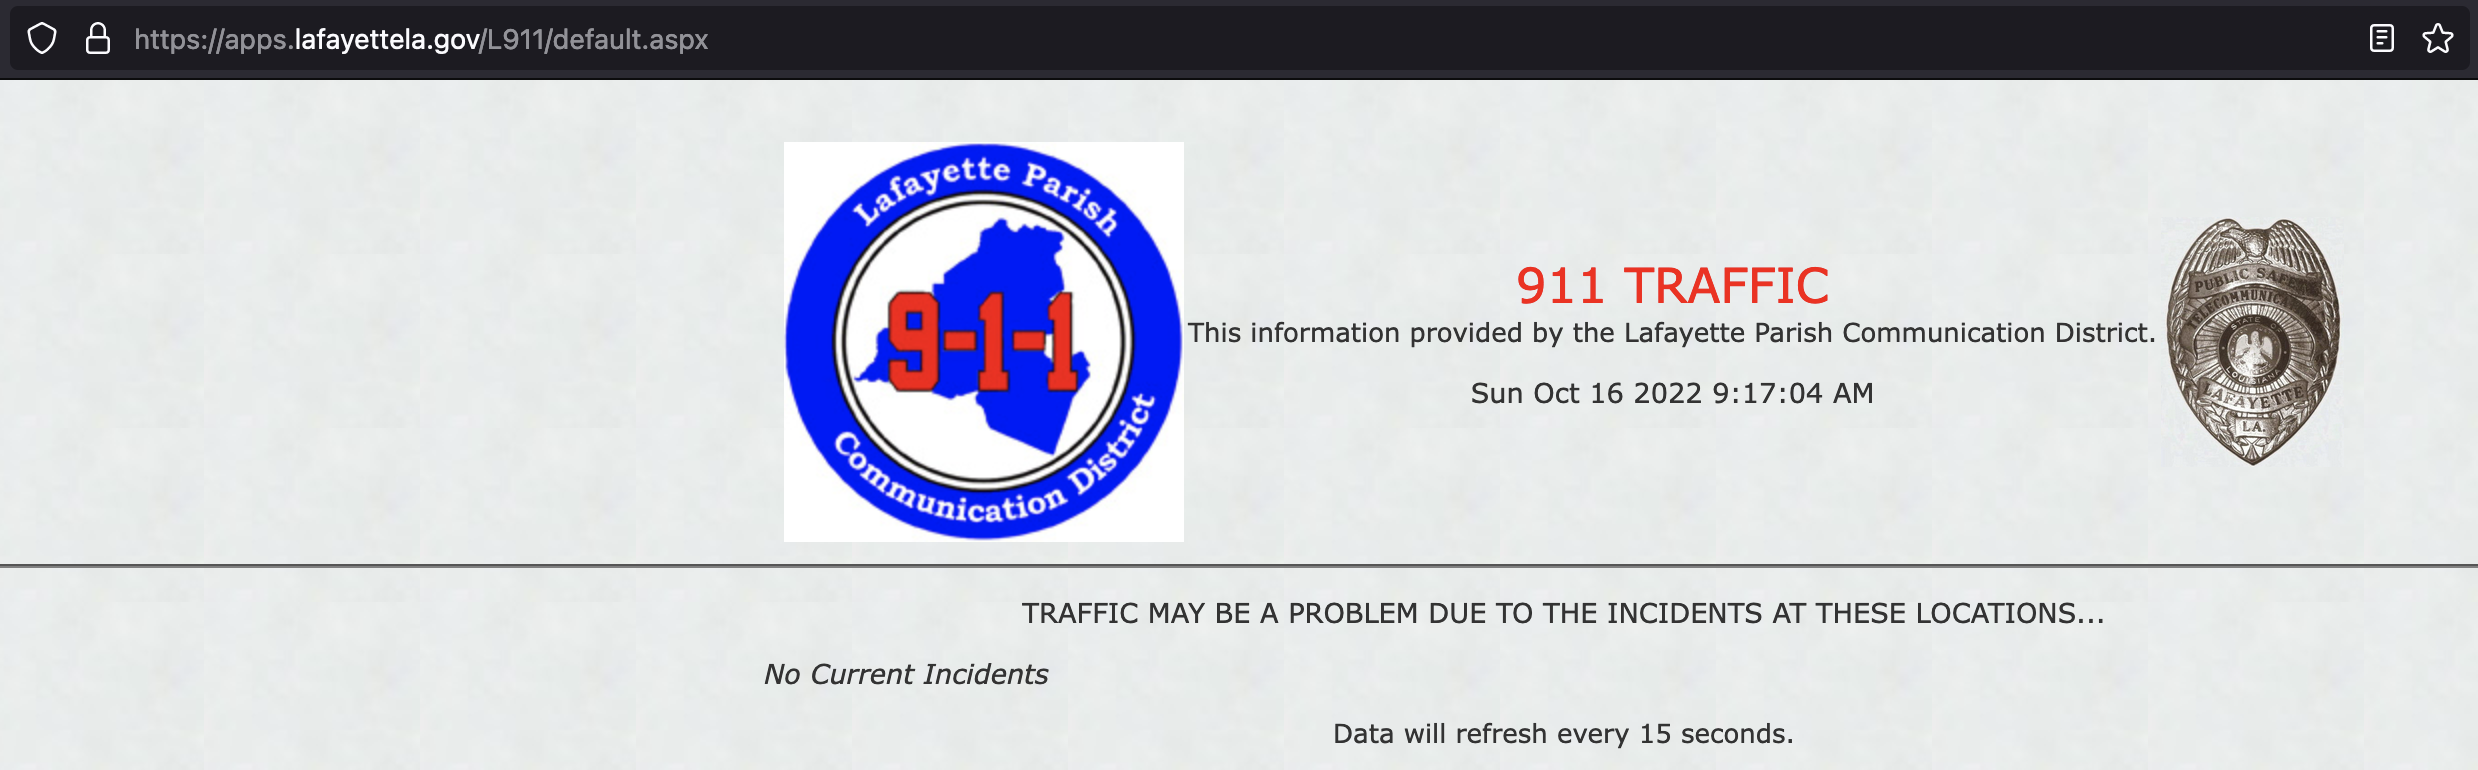 A screenshot of lafayette911.org with no incidents listed